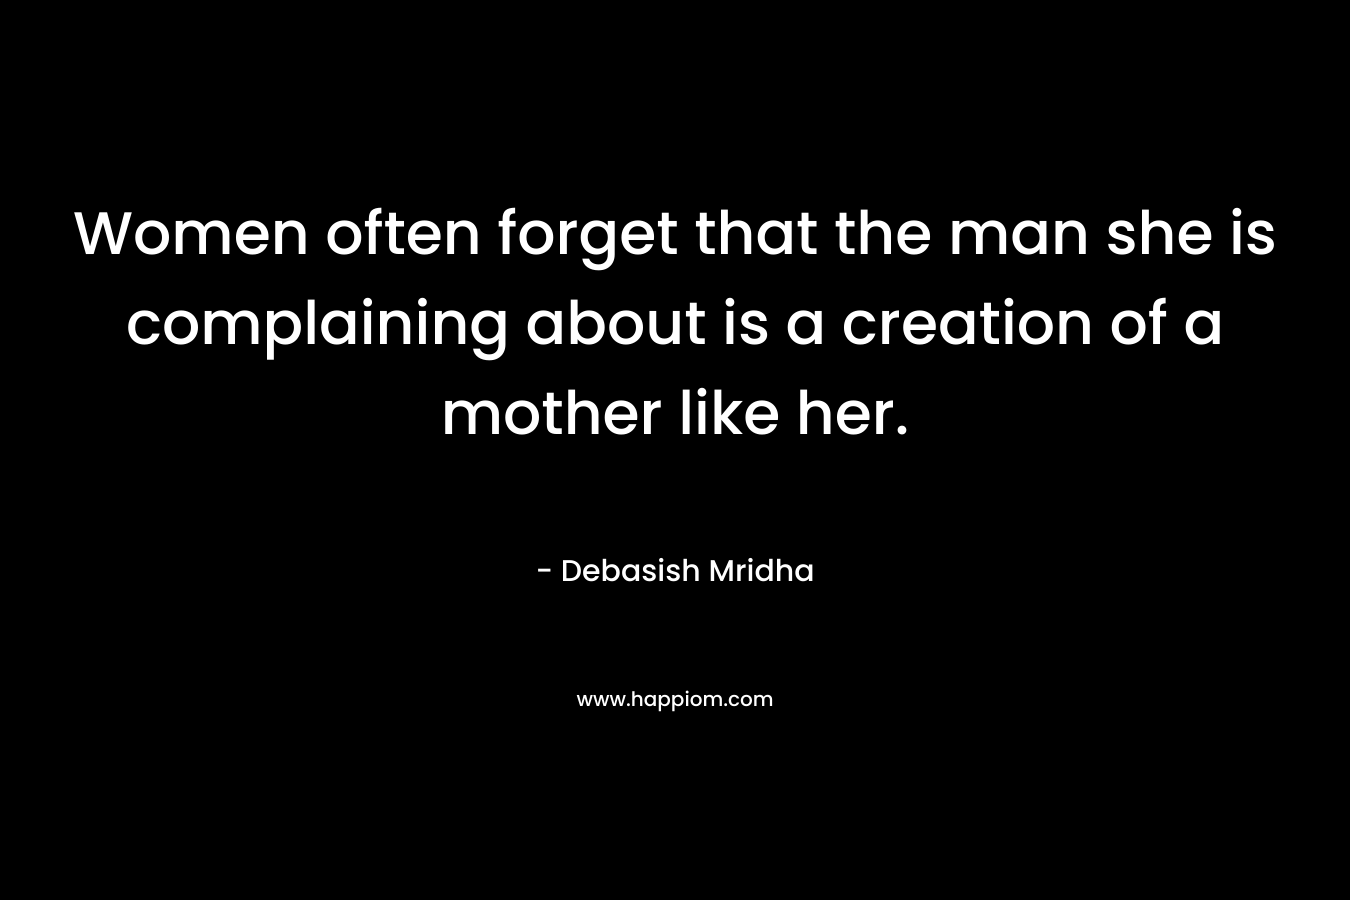 Women often forget that the man she is complaining about is a creation of a mother like her. – Debasish Mridha